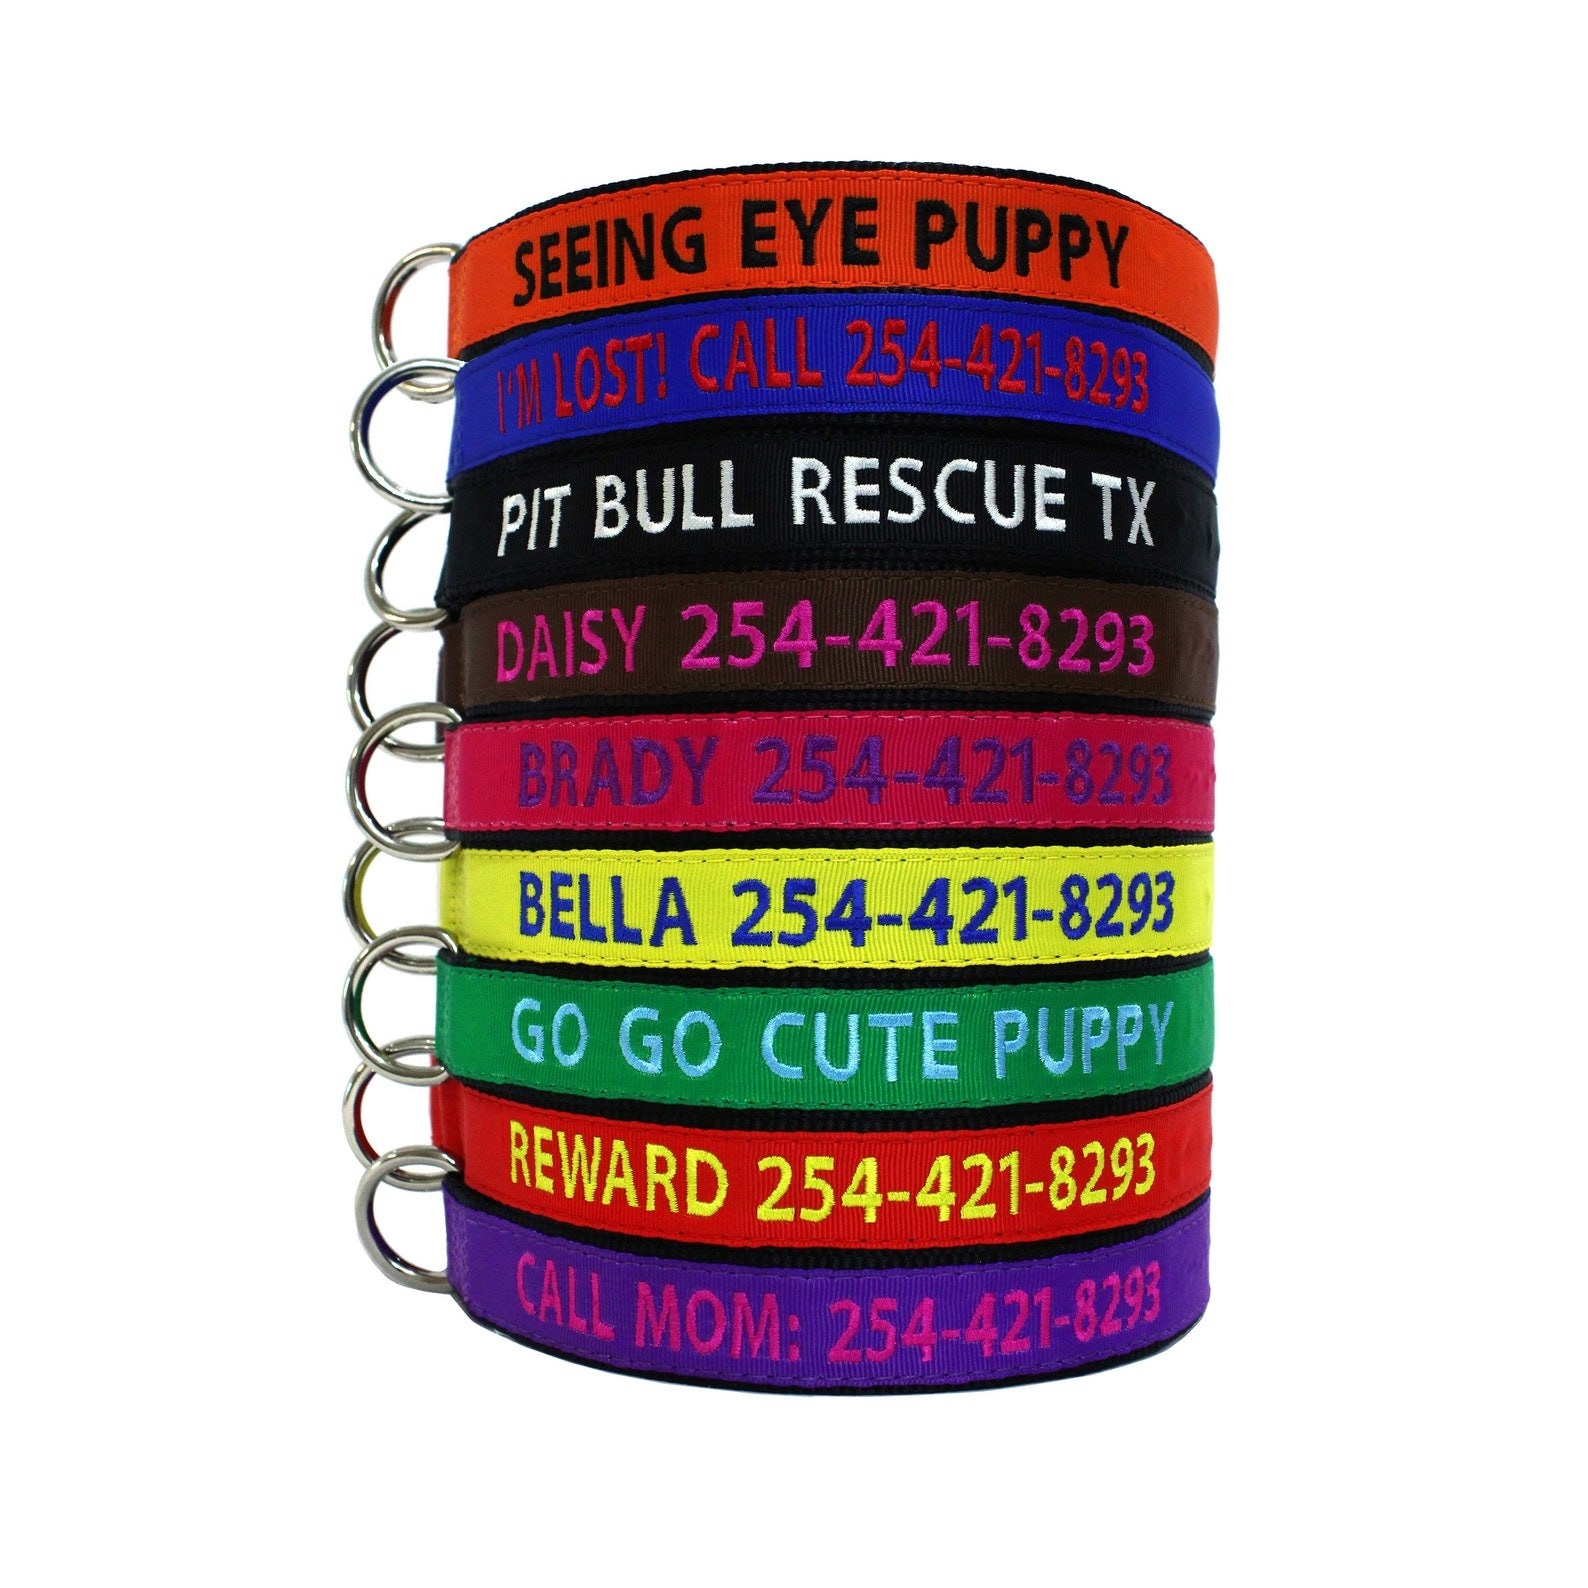 A stack of colorful collars with embroidered names and numbers.